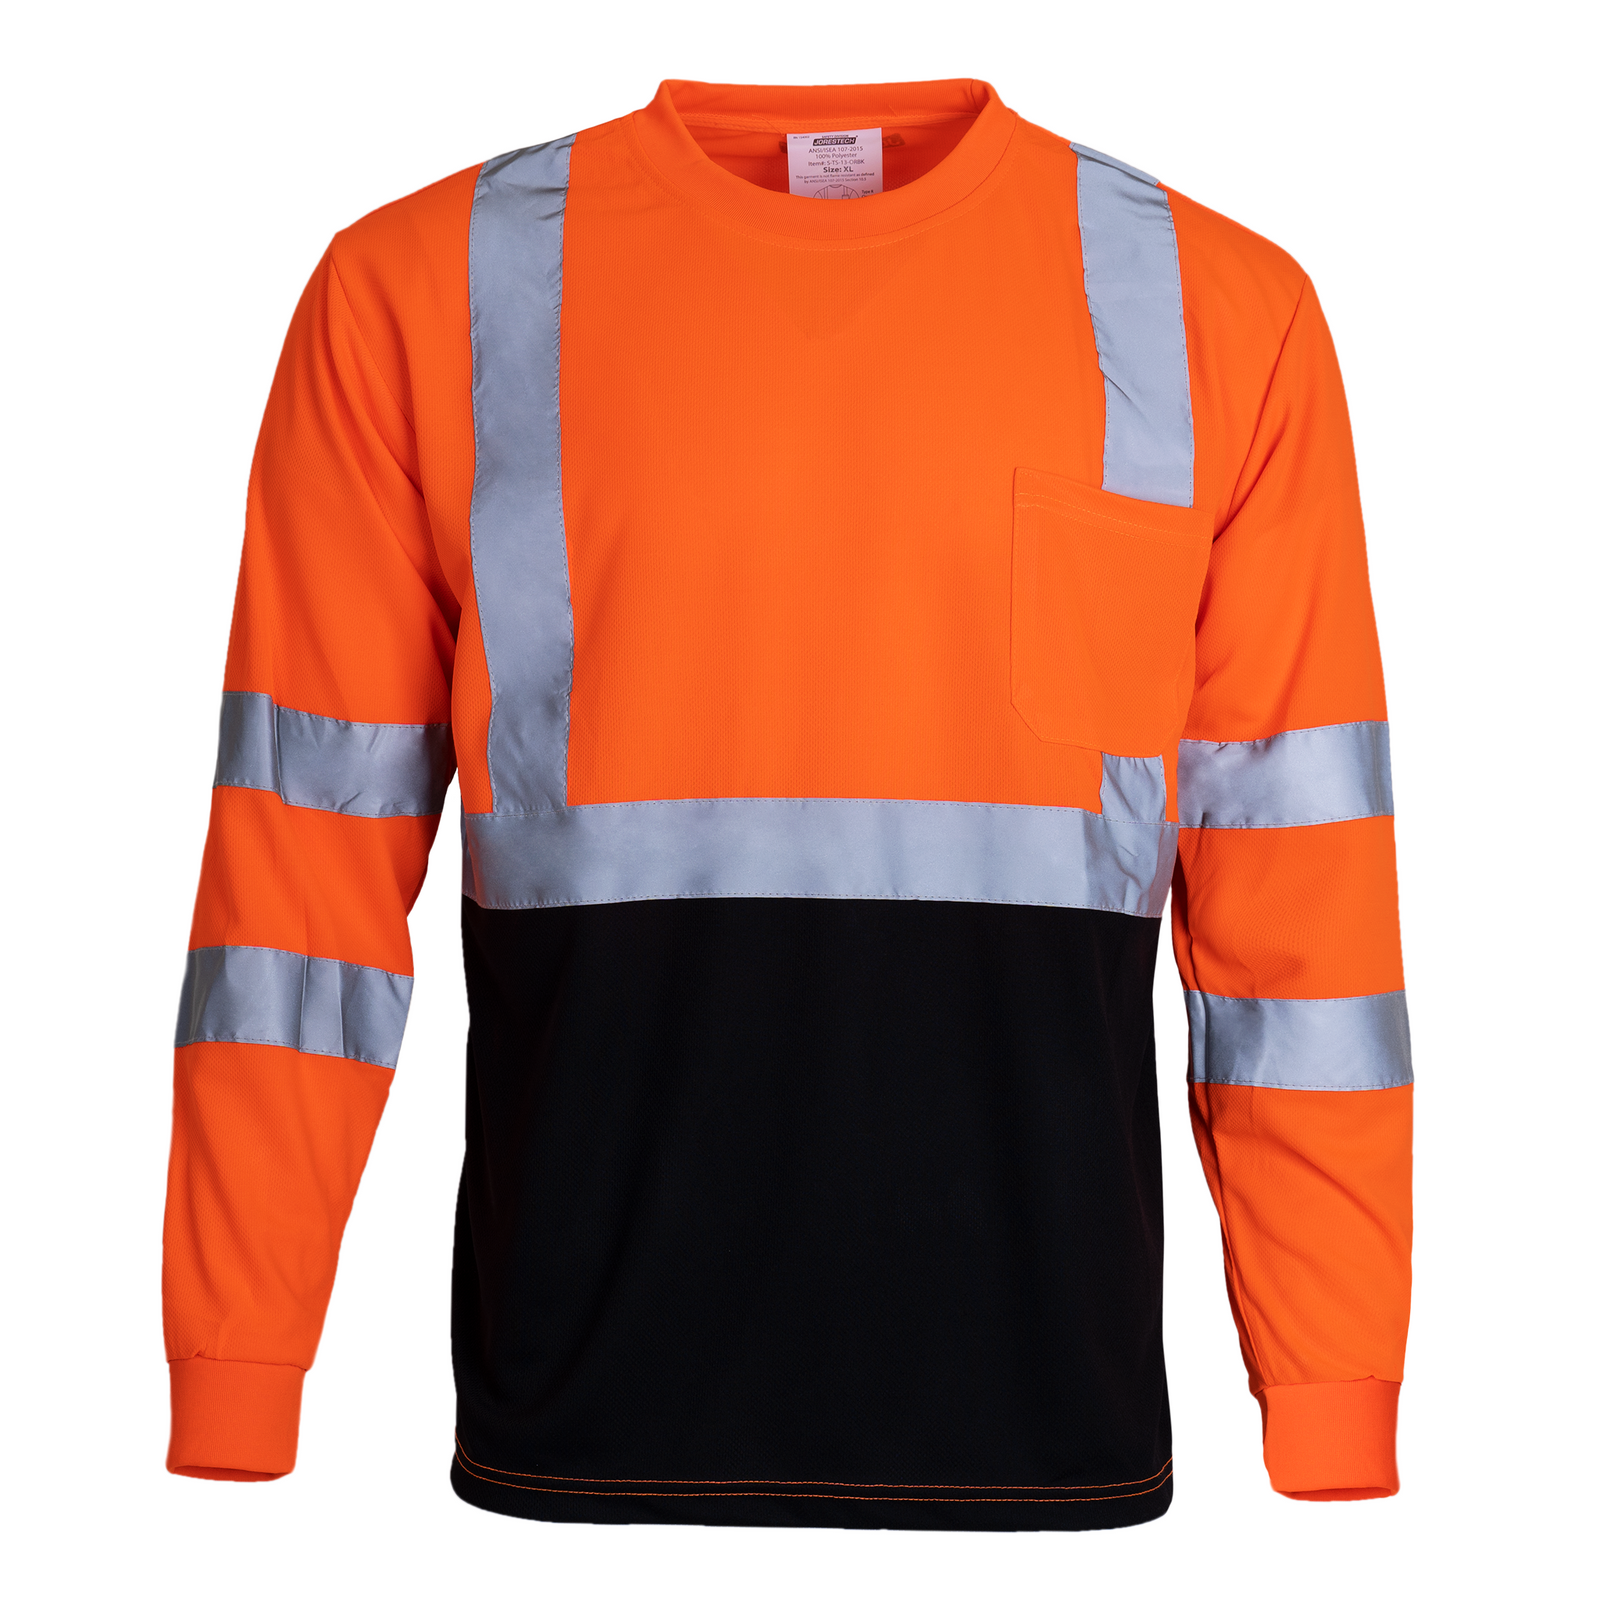 Orange and black hi-vis reflective long sleeve safety sleeve shirt with chest pocket and concealing black breathable fabric